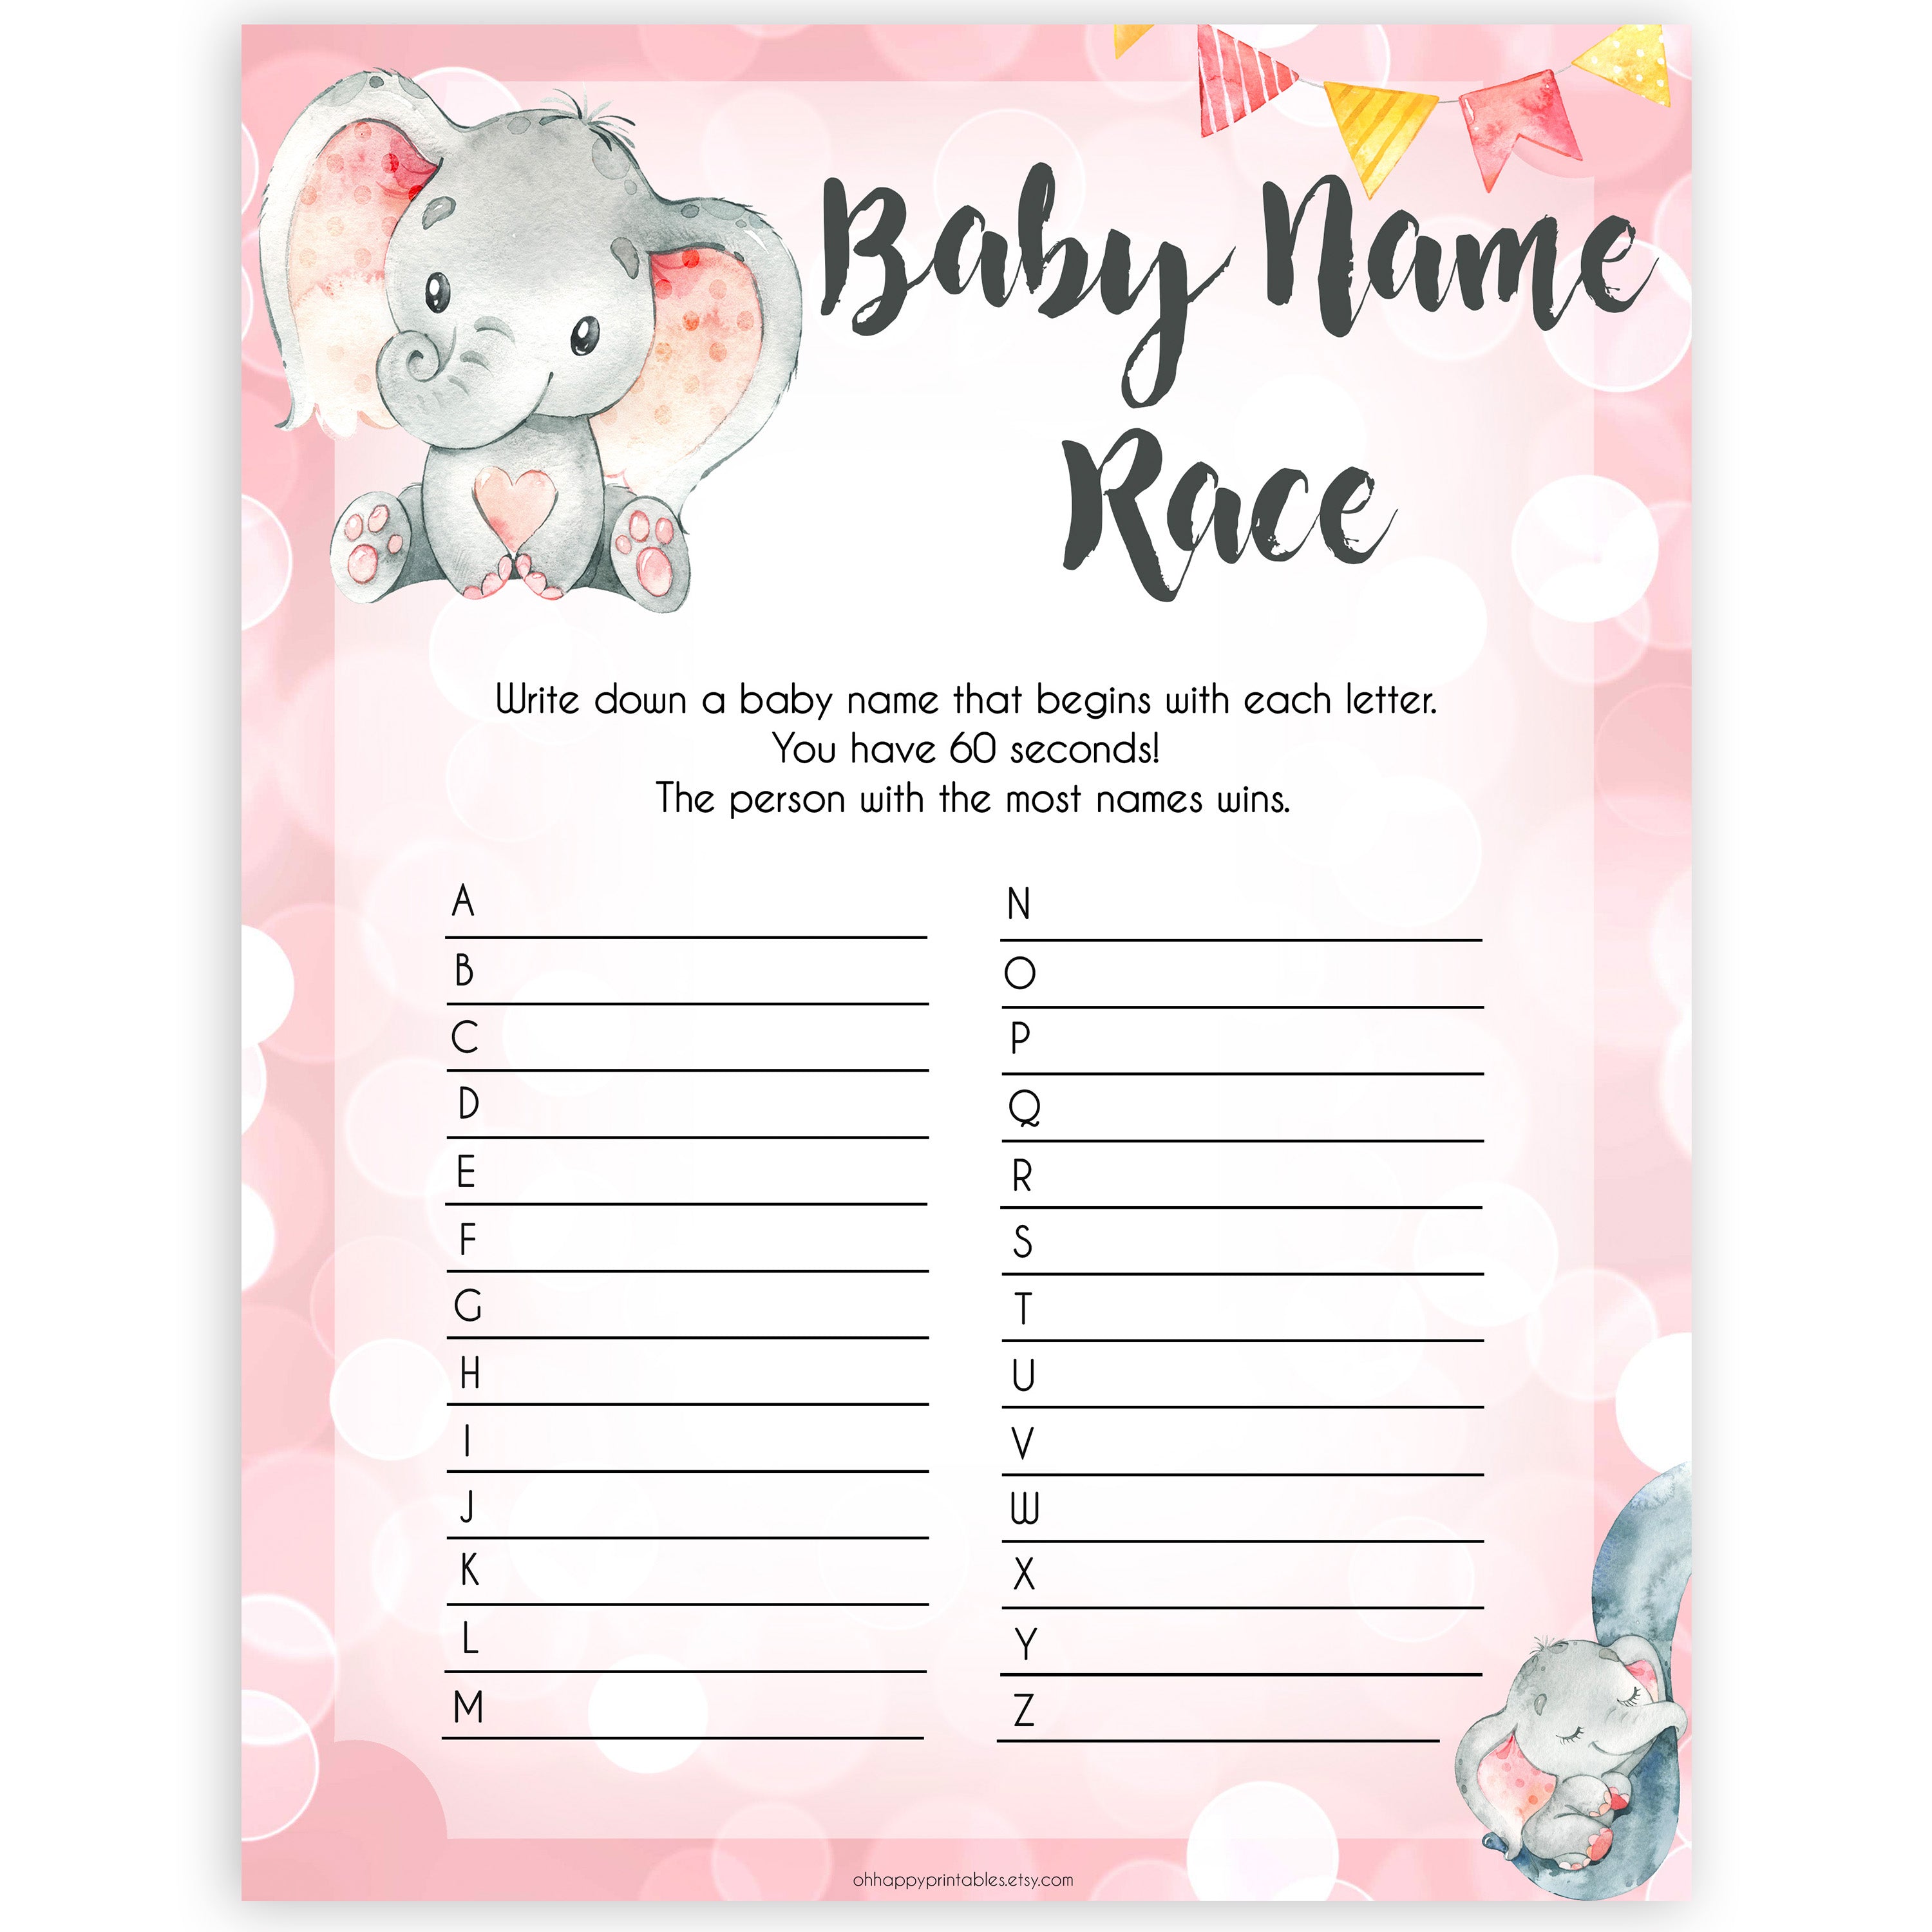 pink elephant baby games, baby name race baby shower games, printable baby shower games, baby shower games, fun baby games, popular baby games, pink baby games